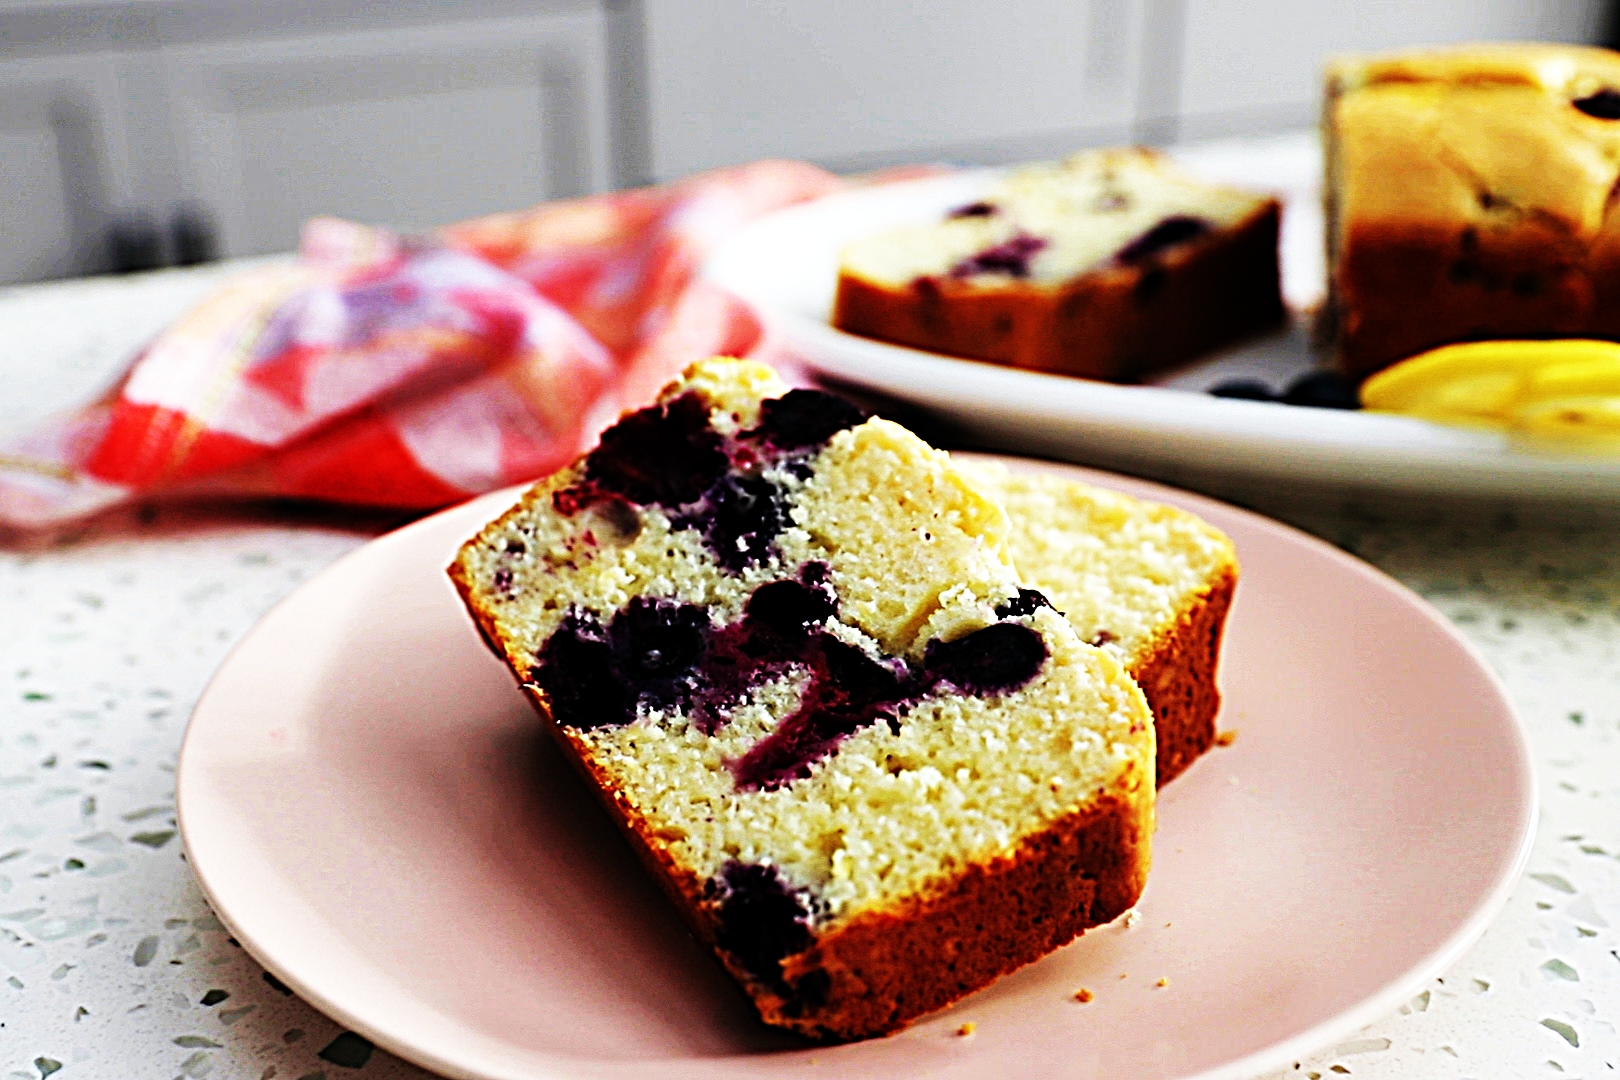 Stupid-Easy Recipe for Lemon Blueberry Bread (#1 Top-Rated)